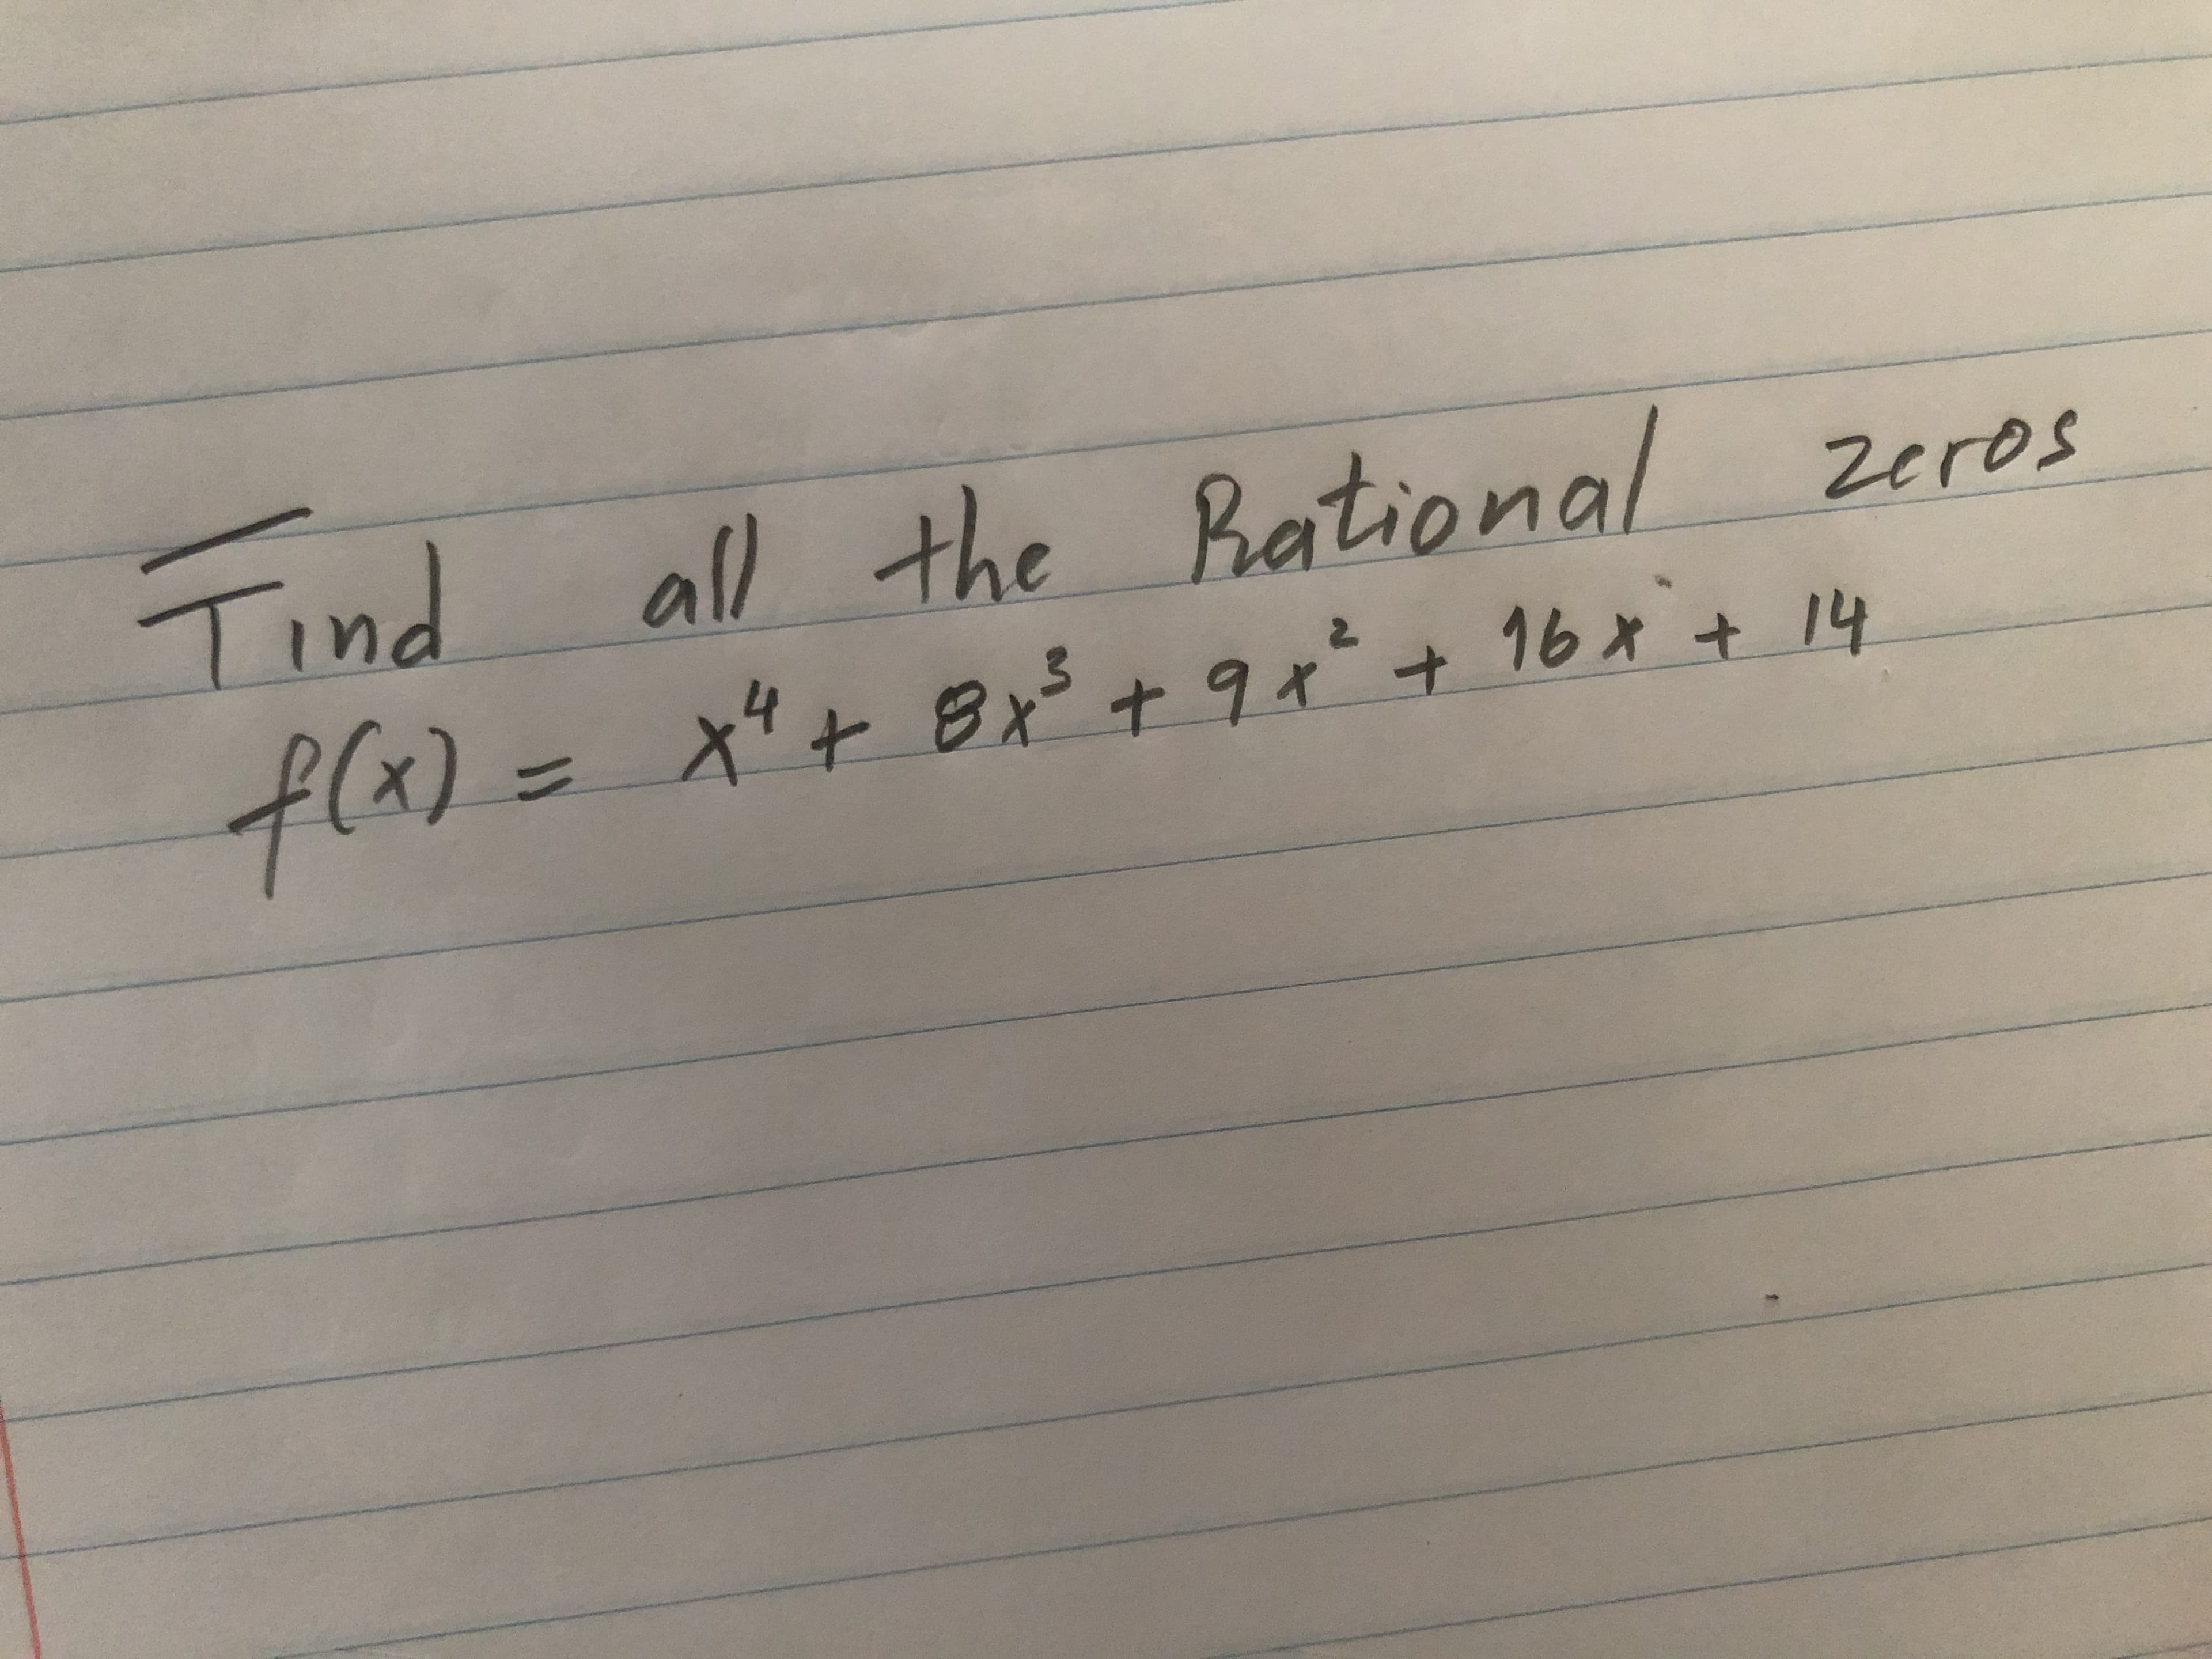 Tind all the Rational
Zeros
fa)= +Bxだ+ターナ
x"+ Bx$+9x' + 16x+ 14
+ 8x
